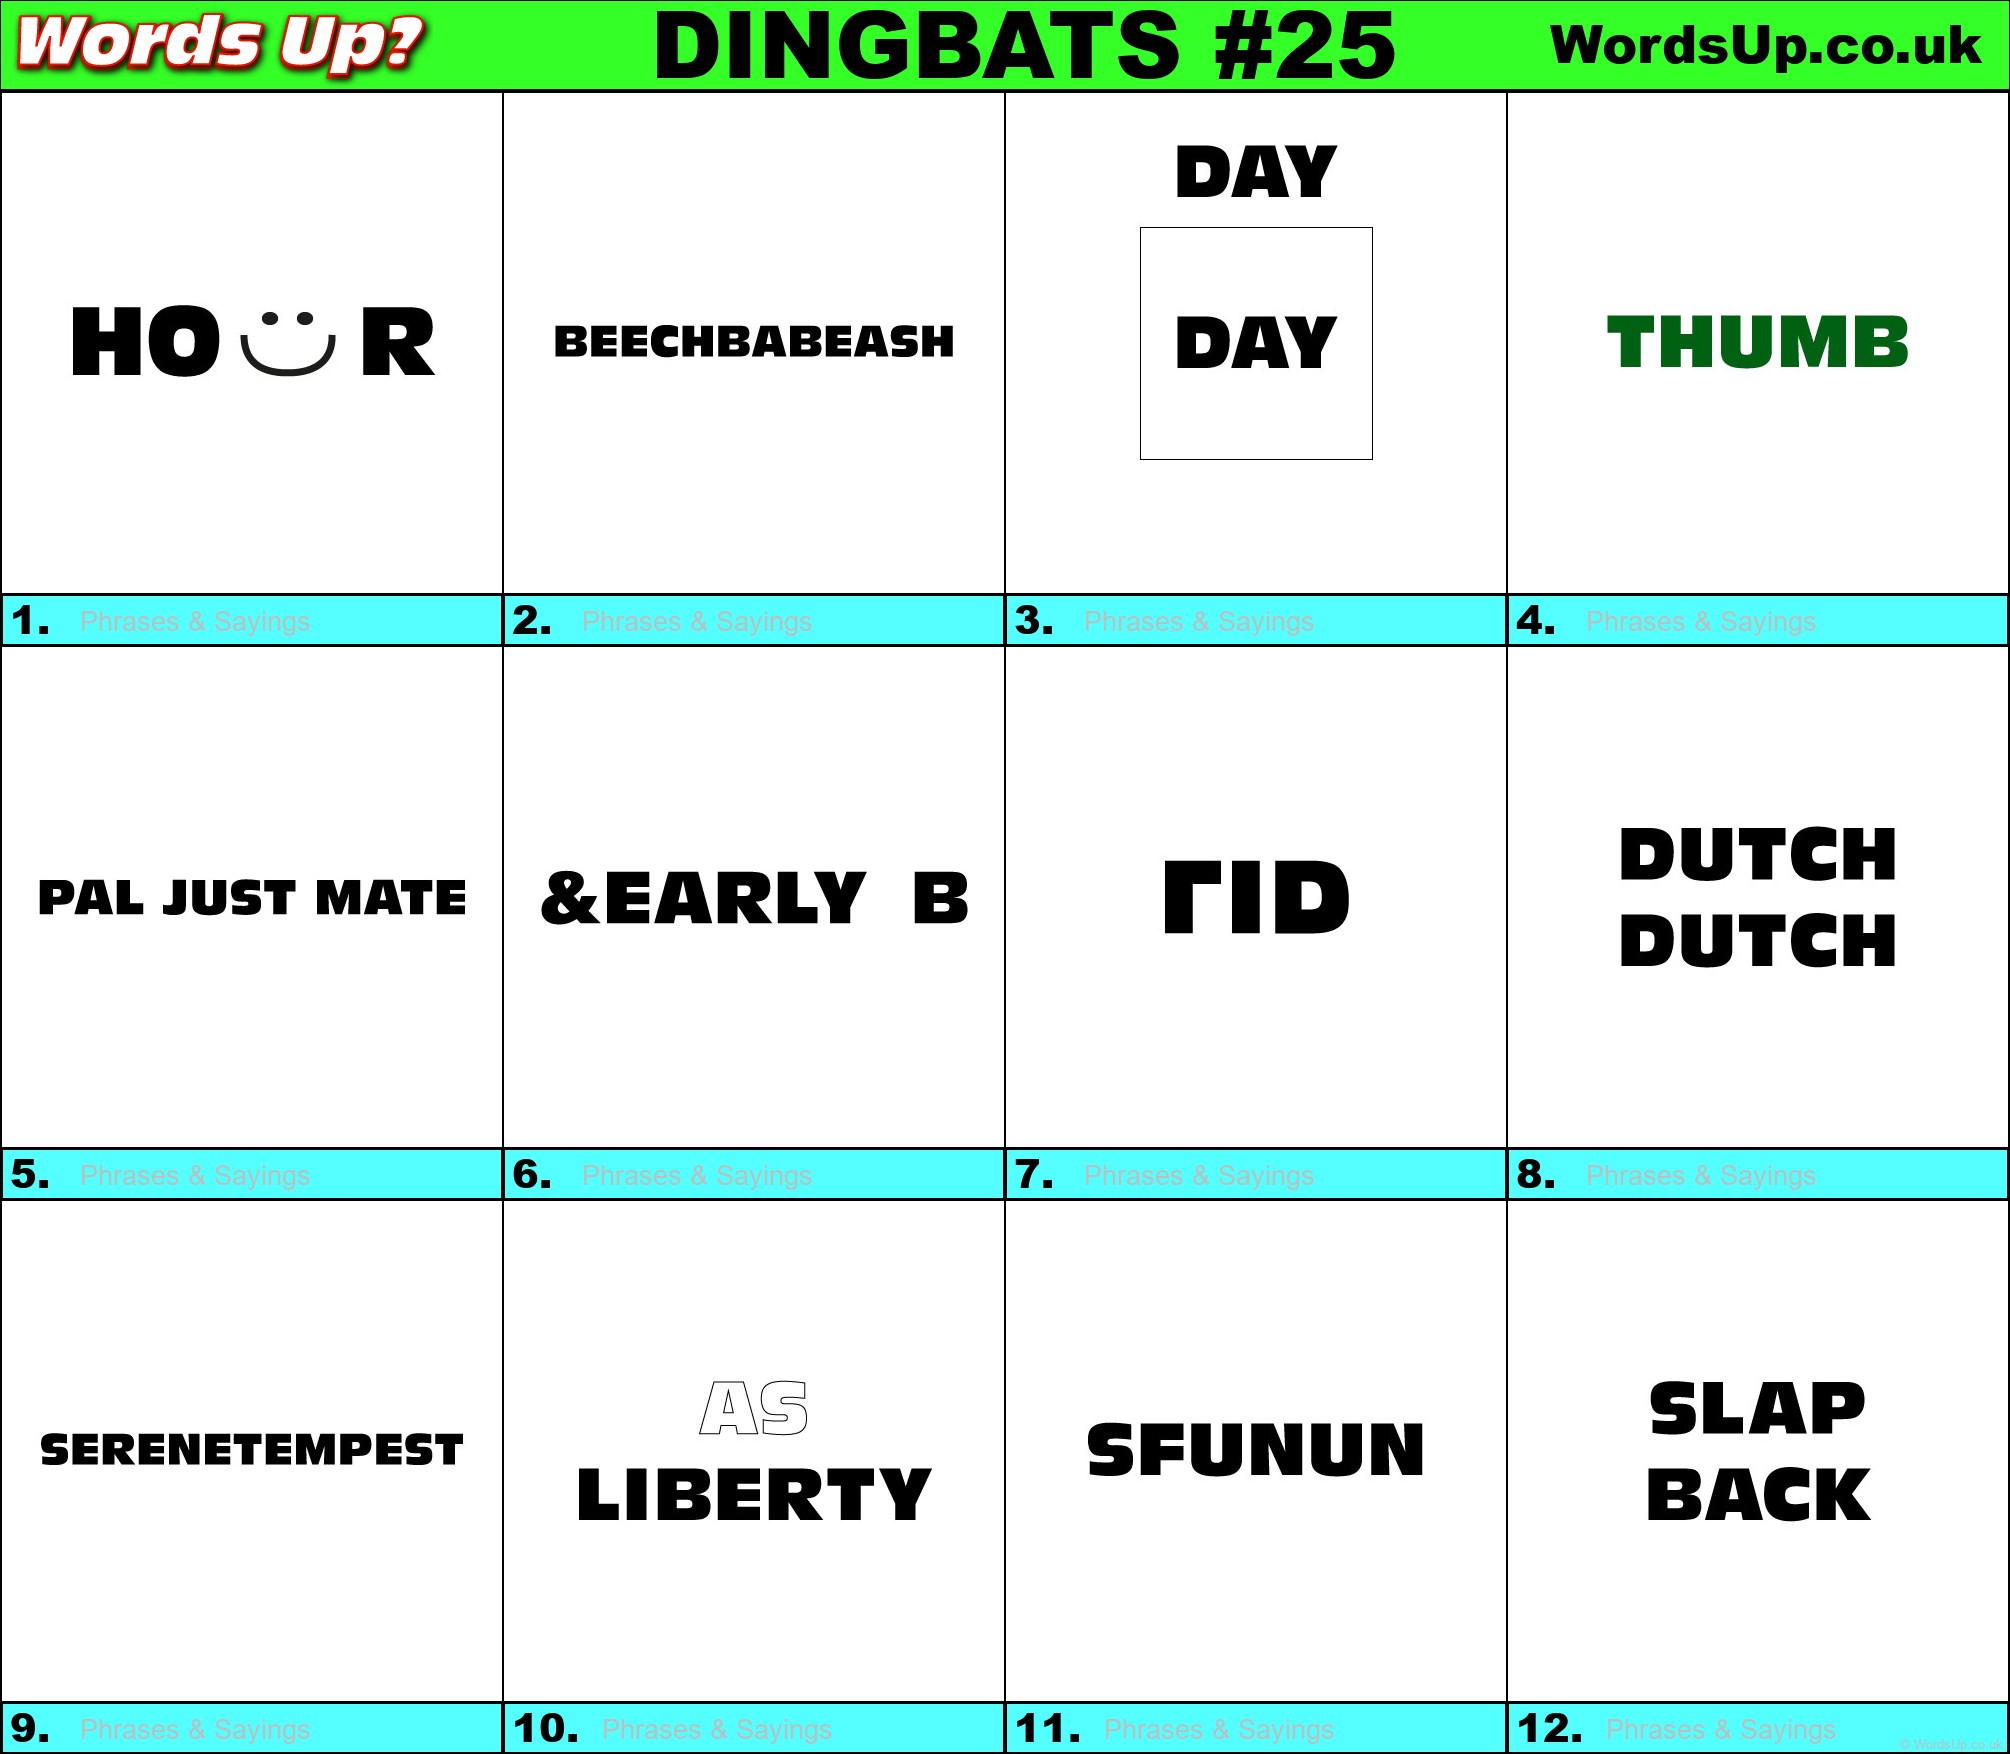 Dingbats Quiz 25 Find The Answers To Over 730 Dingbats Words Up Games